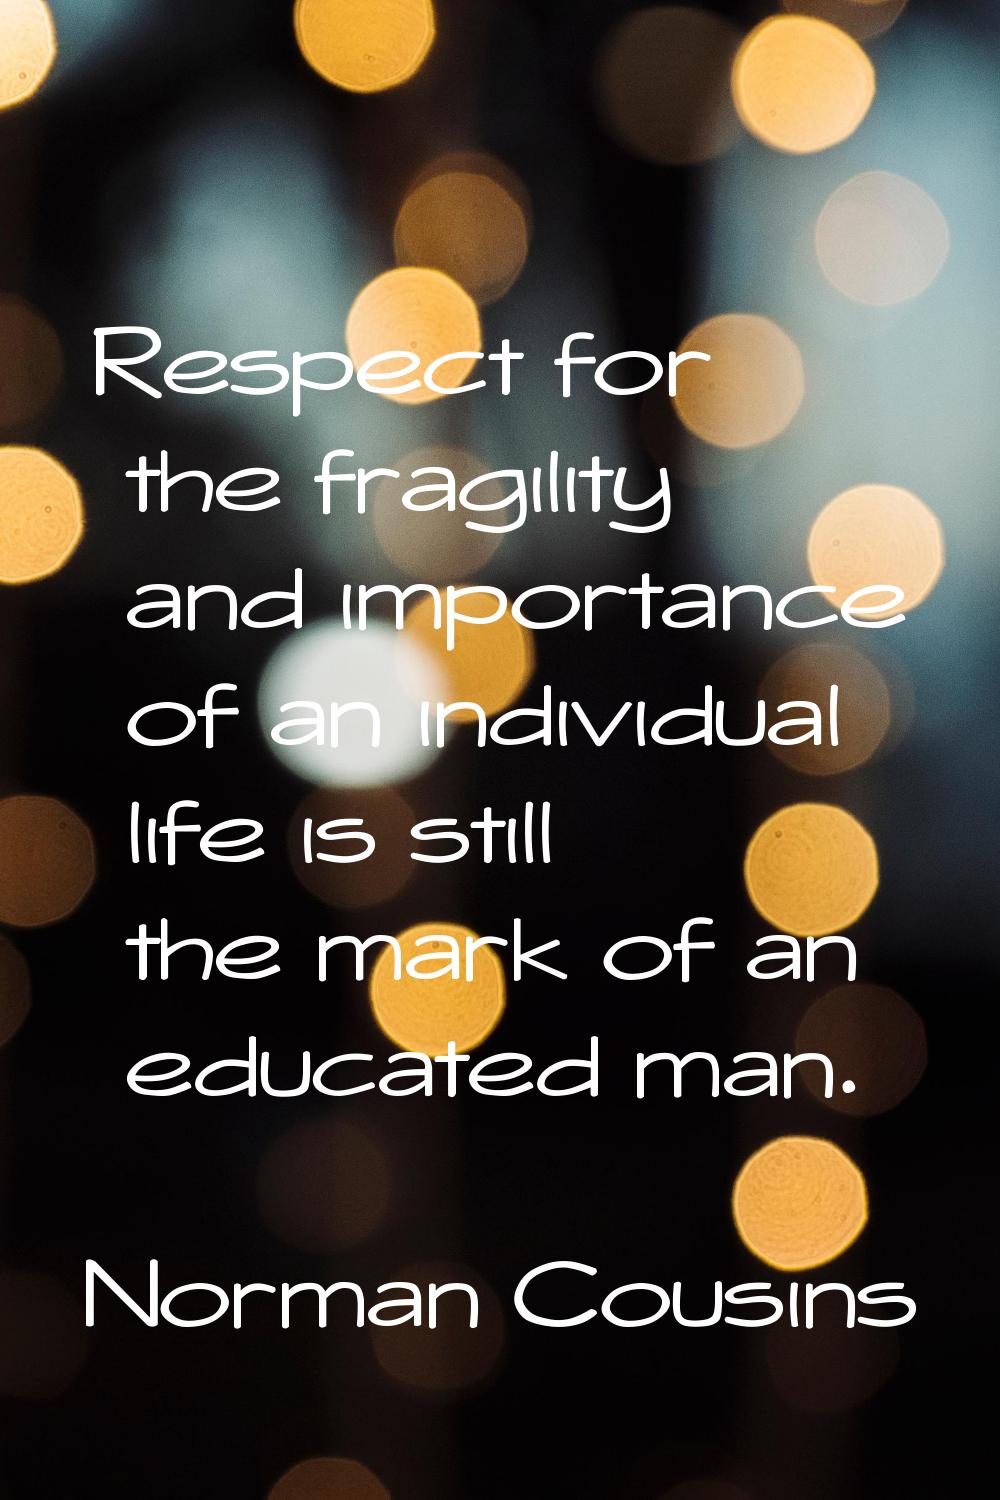 Respect for the fragility and importance of an individual life is still the mark of an educated man